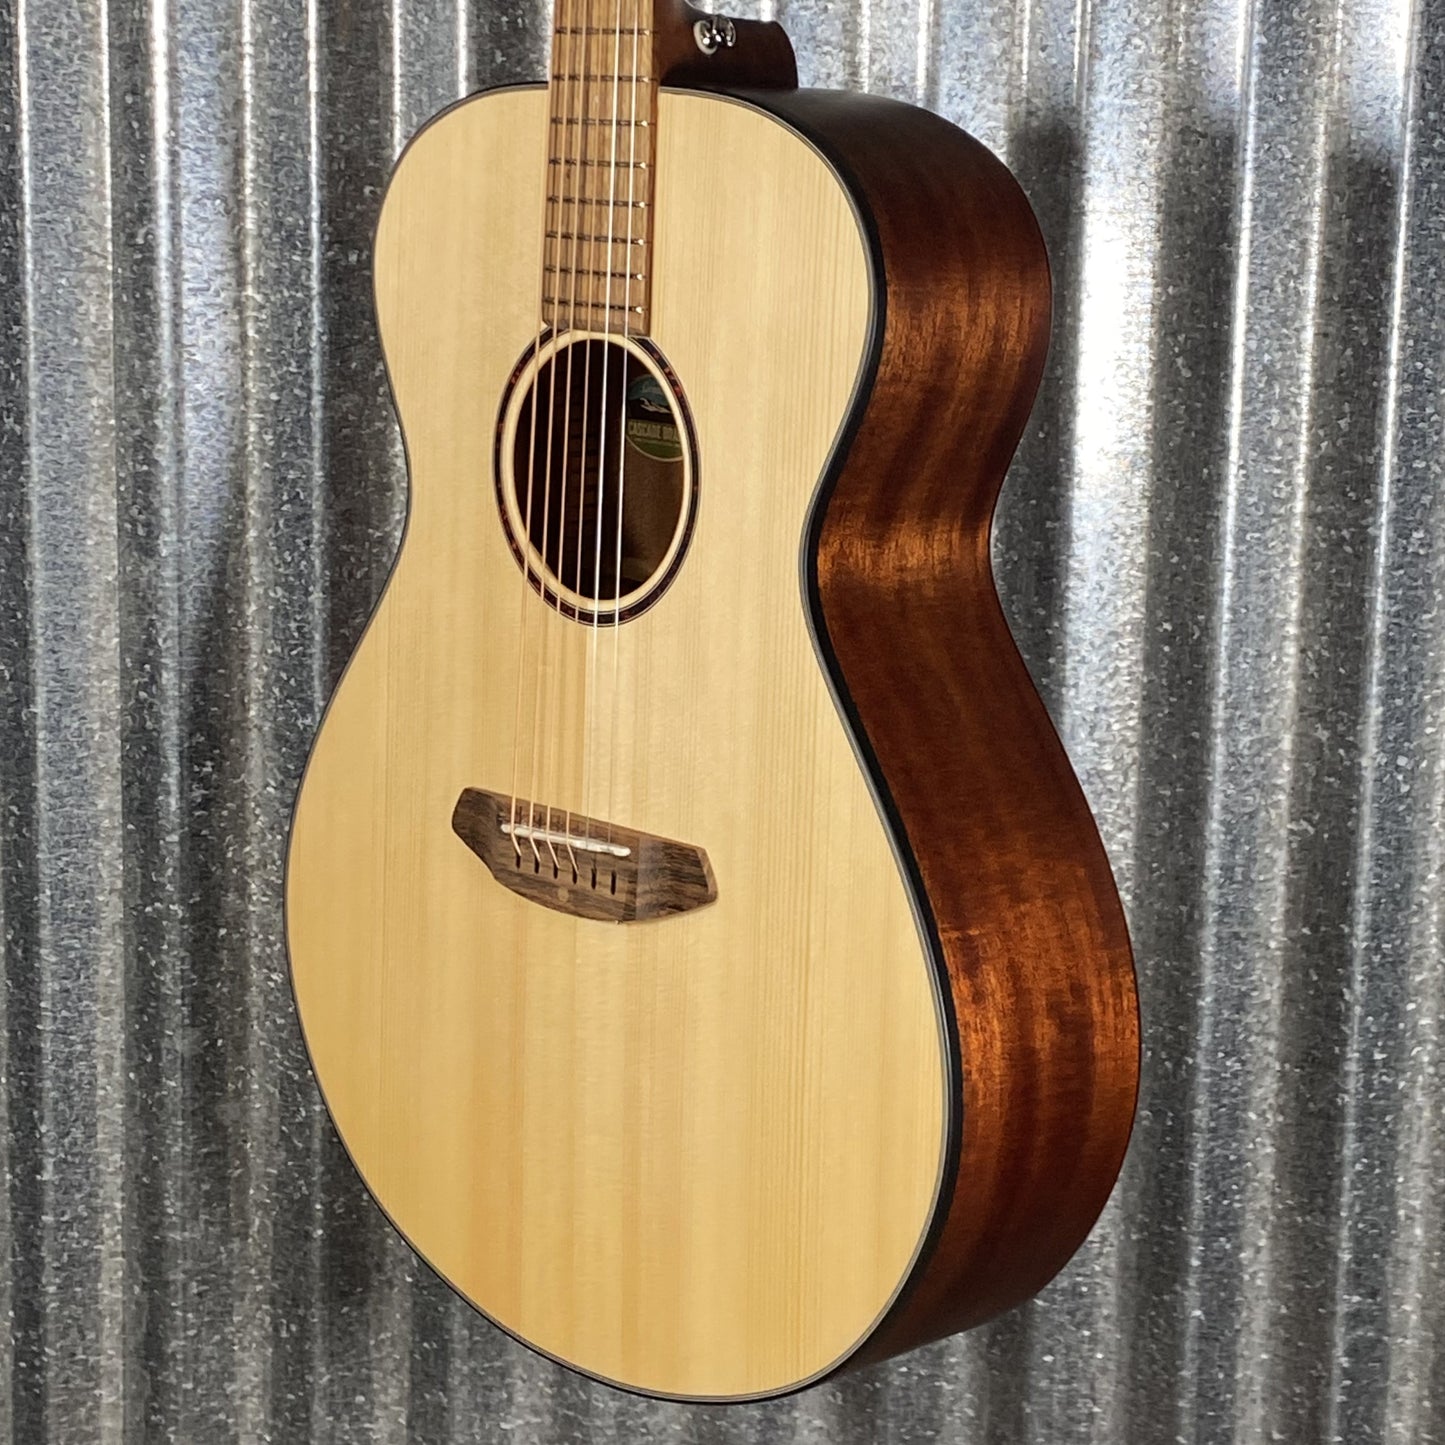 Breedlove Discovery S Concert Spruce Acoustic Guitar #5397